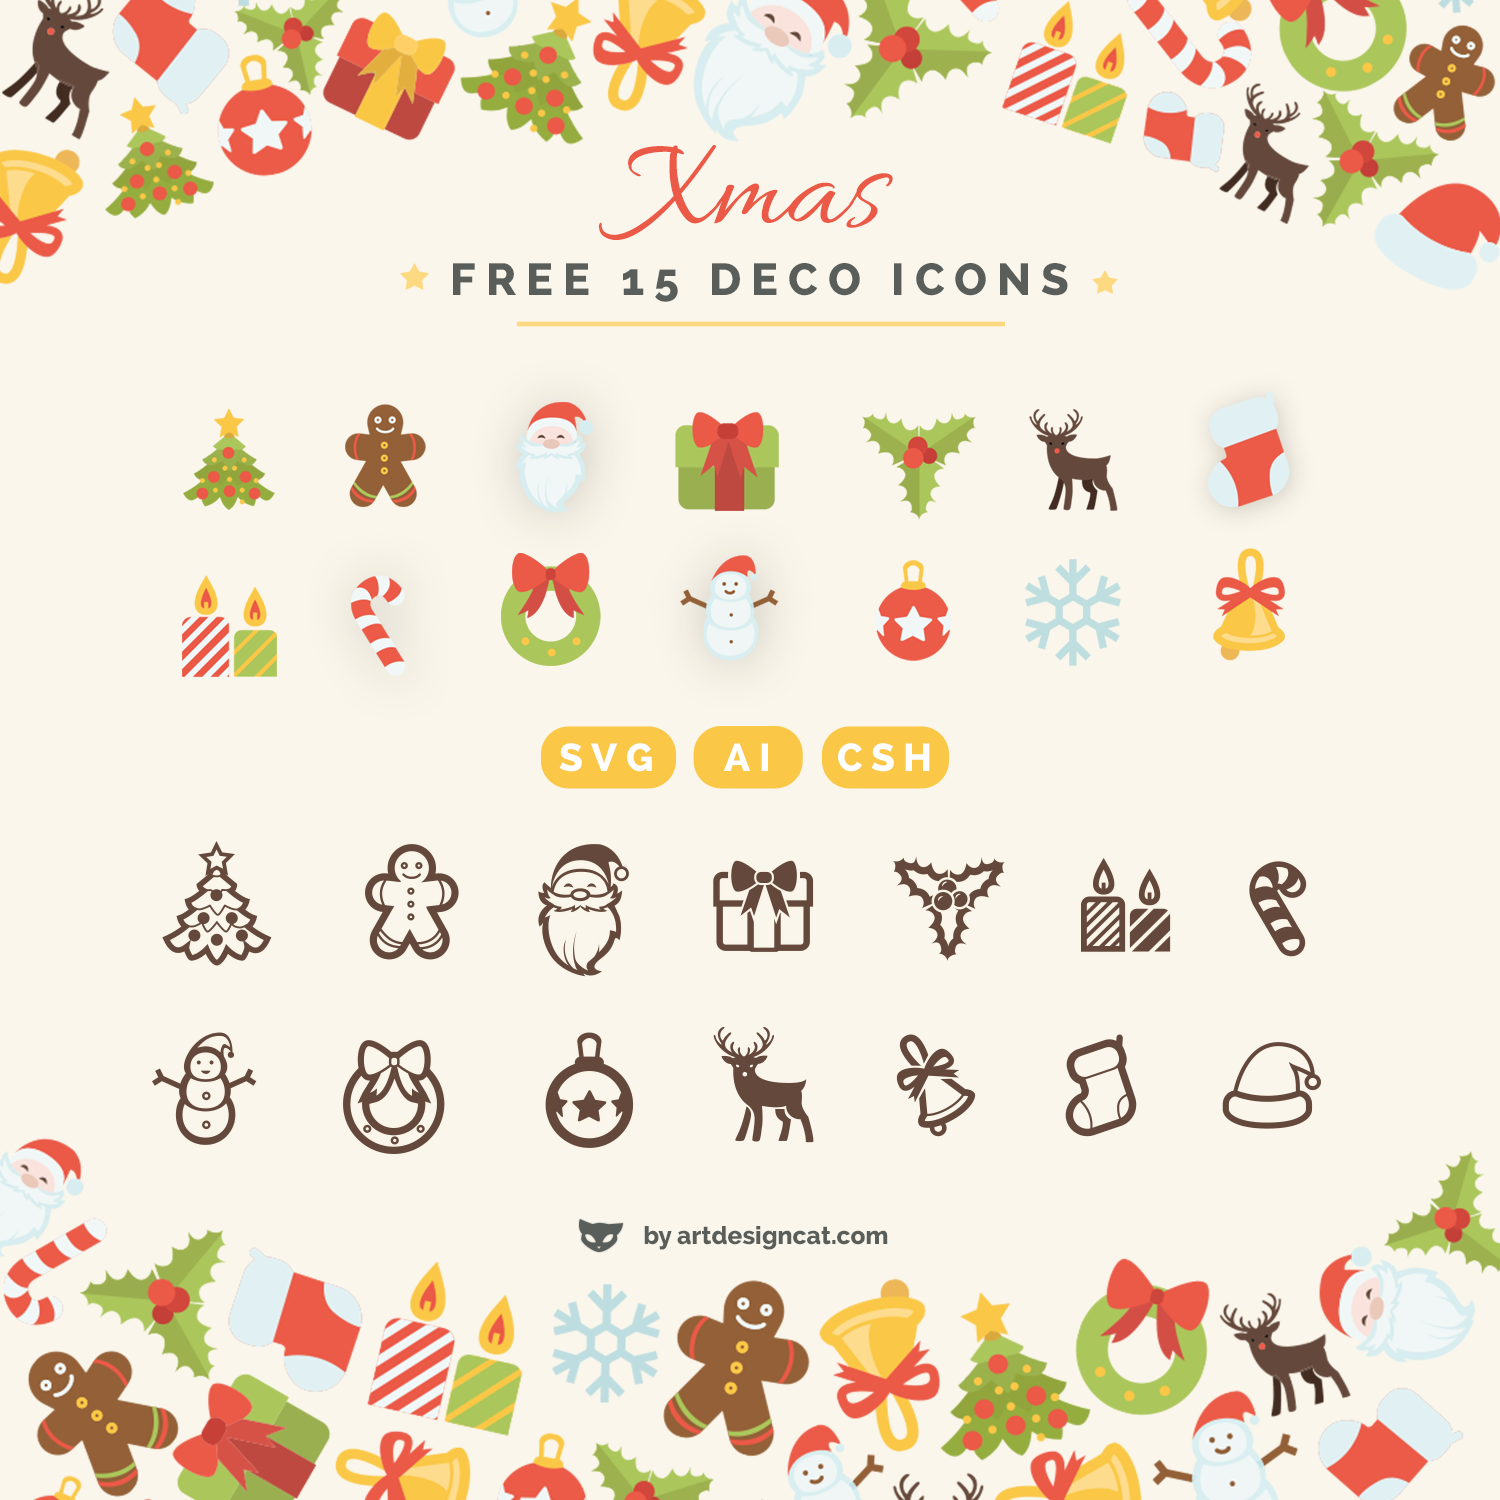 Xmas Free Deco 15 vector Icons in ai svg